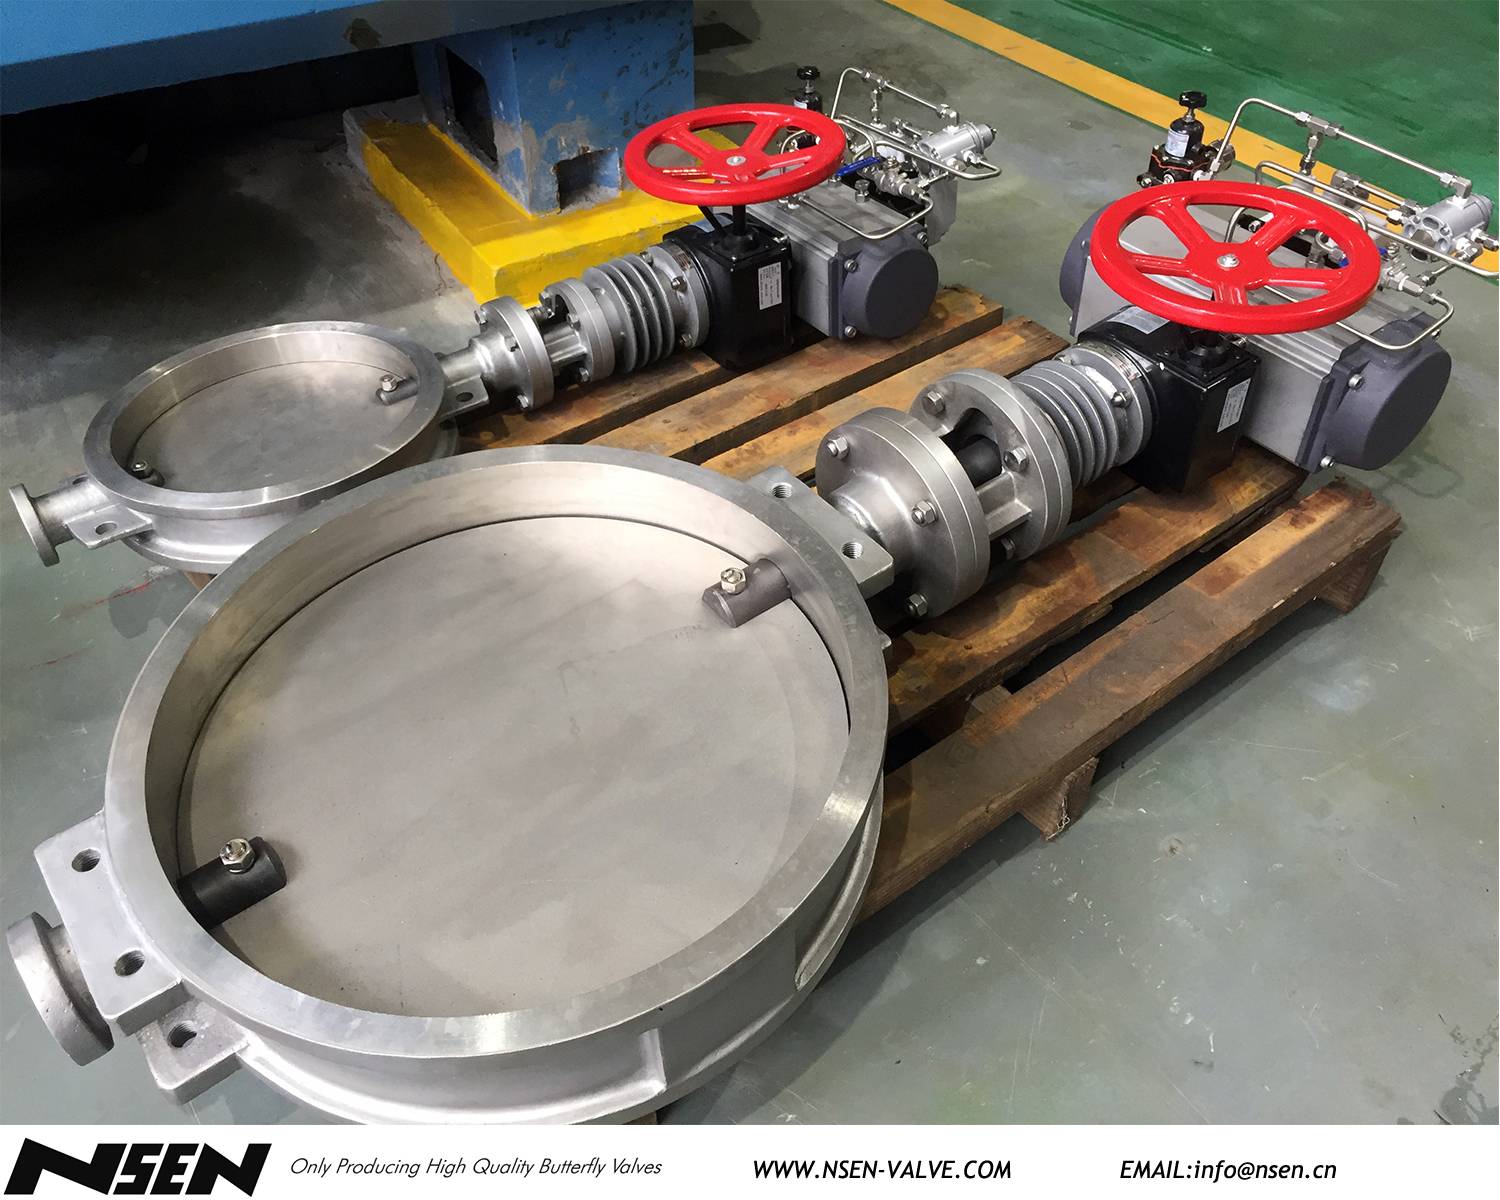 Pneumatic operated stainless steel damper with cooling fin